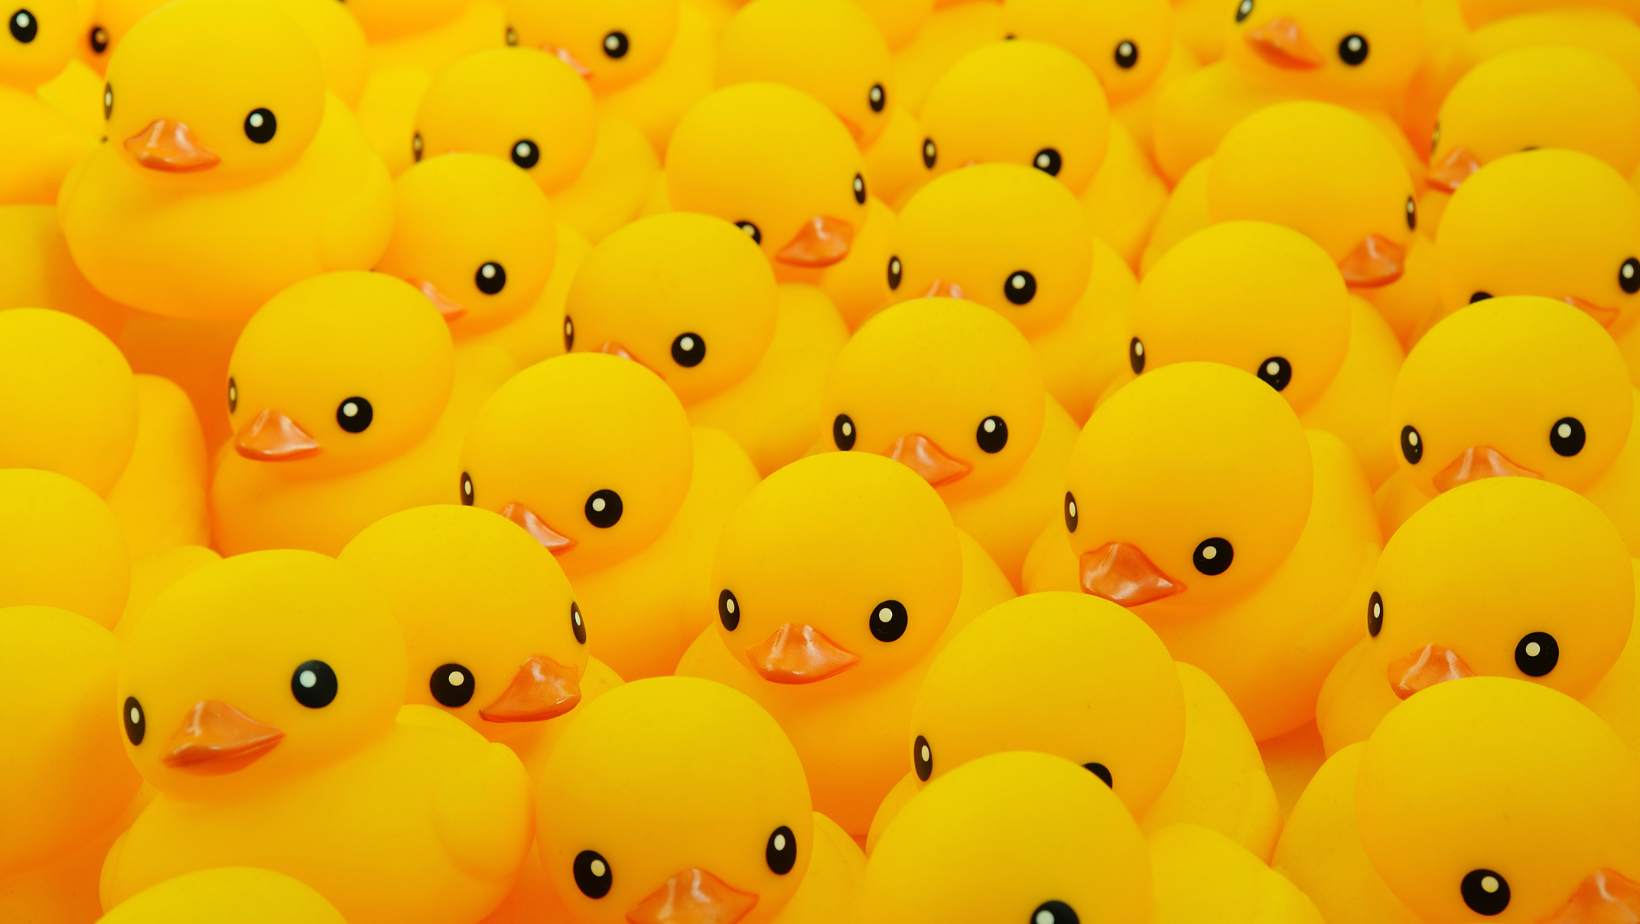 How Can Rubber Ducks Be Used Innovatively?